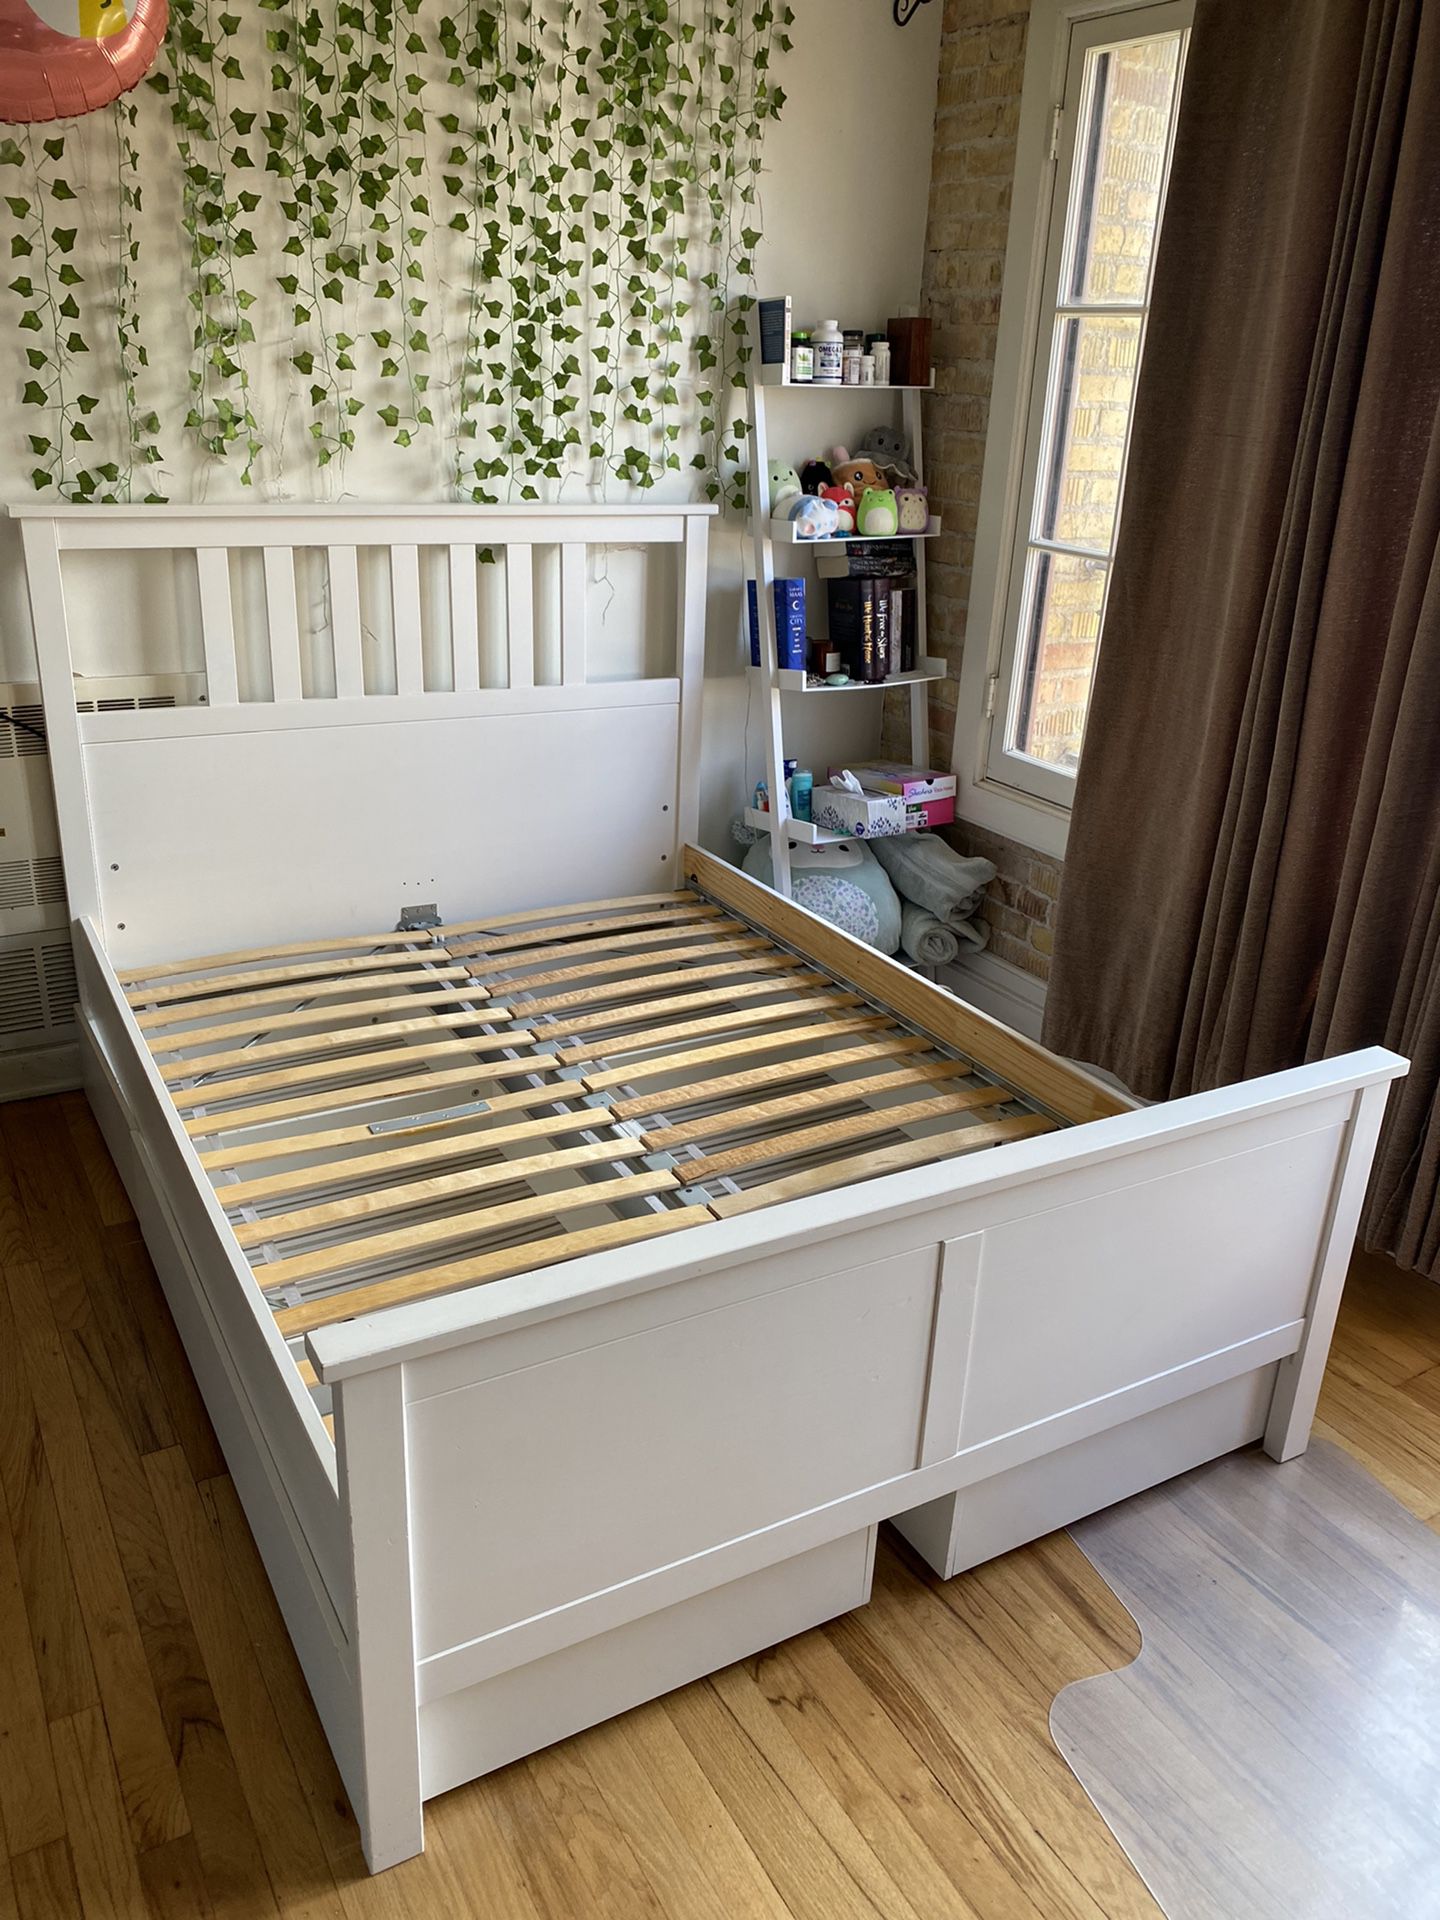 IKEA HEMNES Bed Frame for Sale in CA -